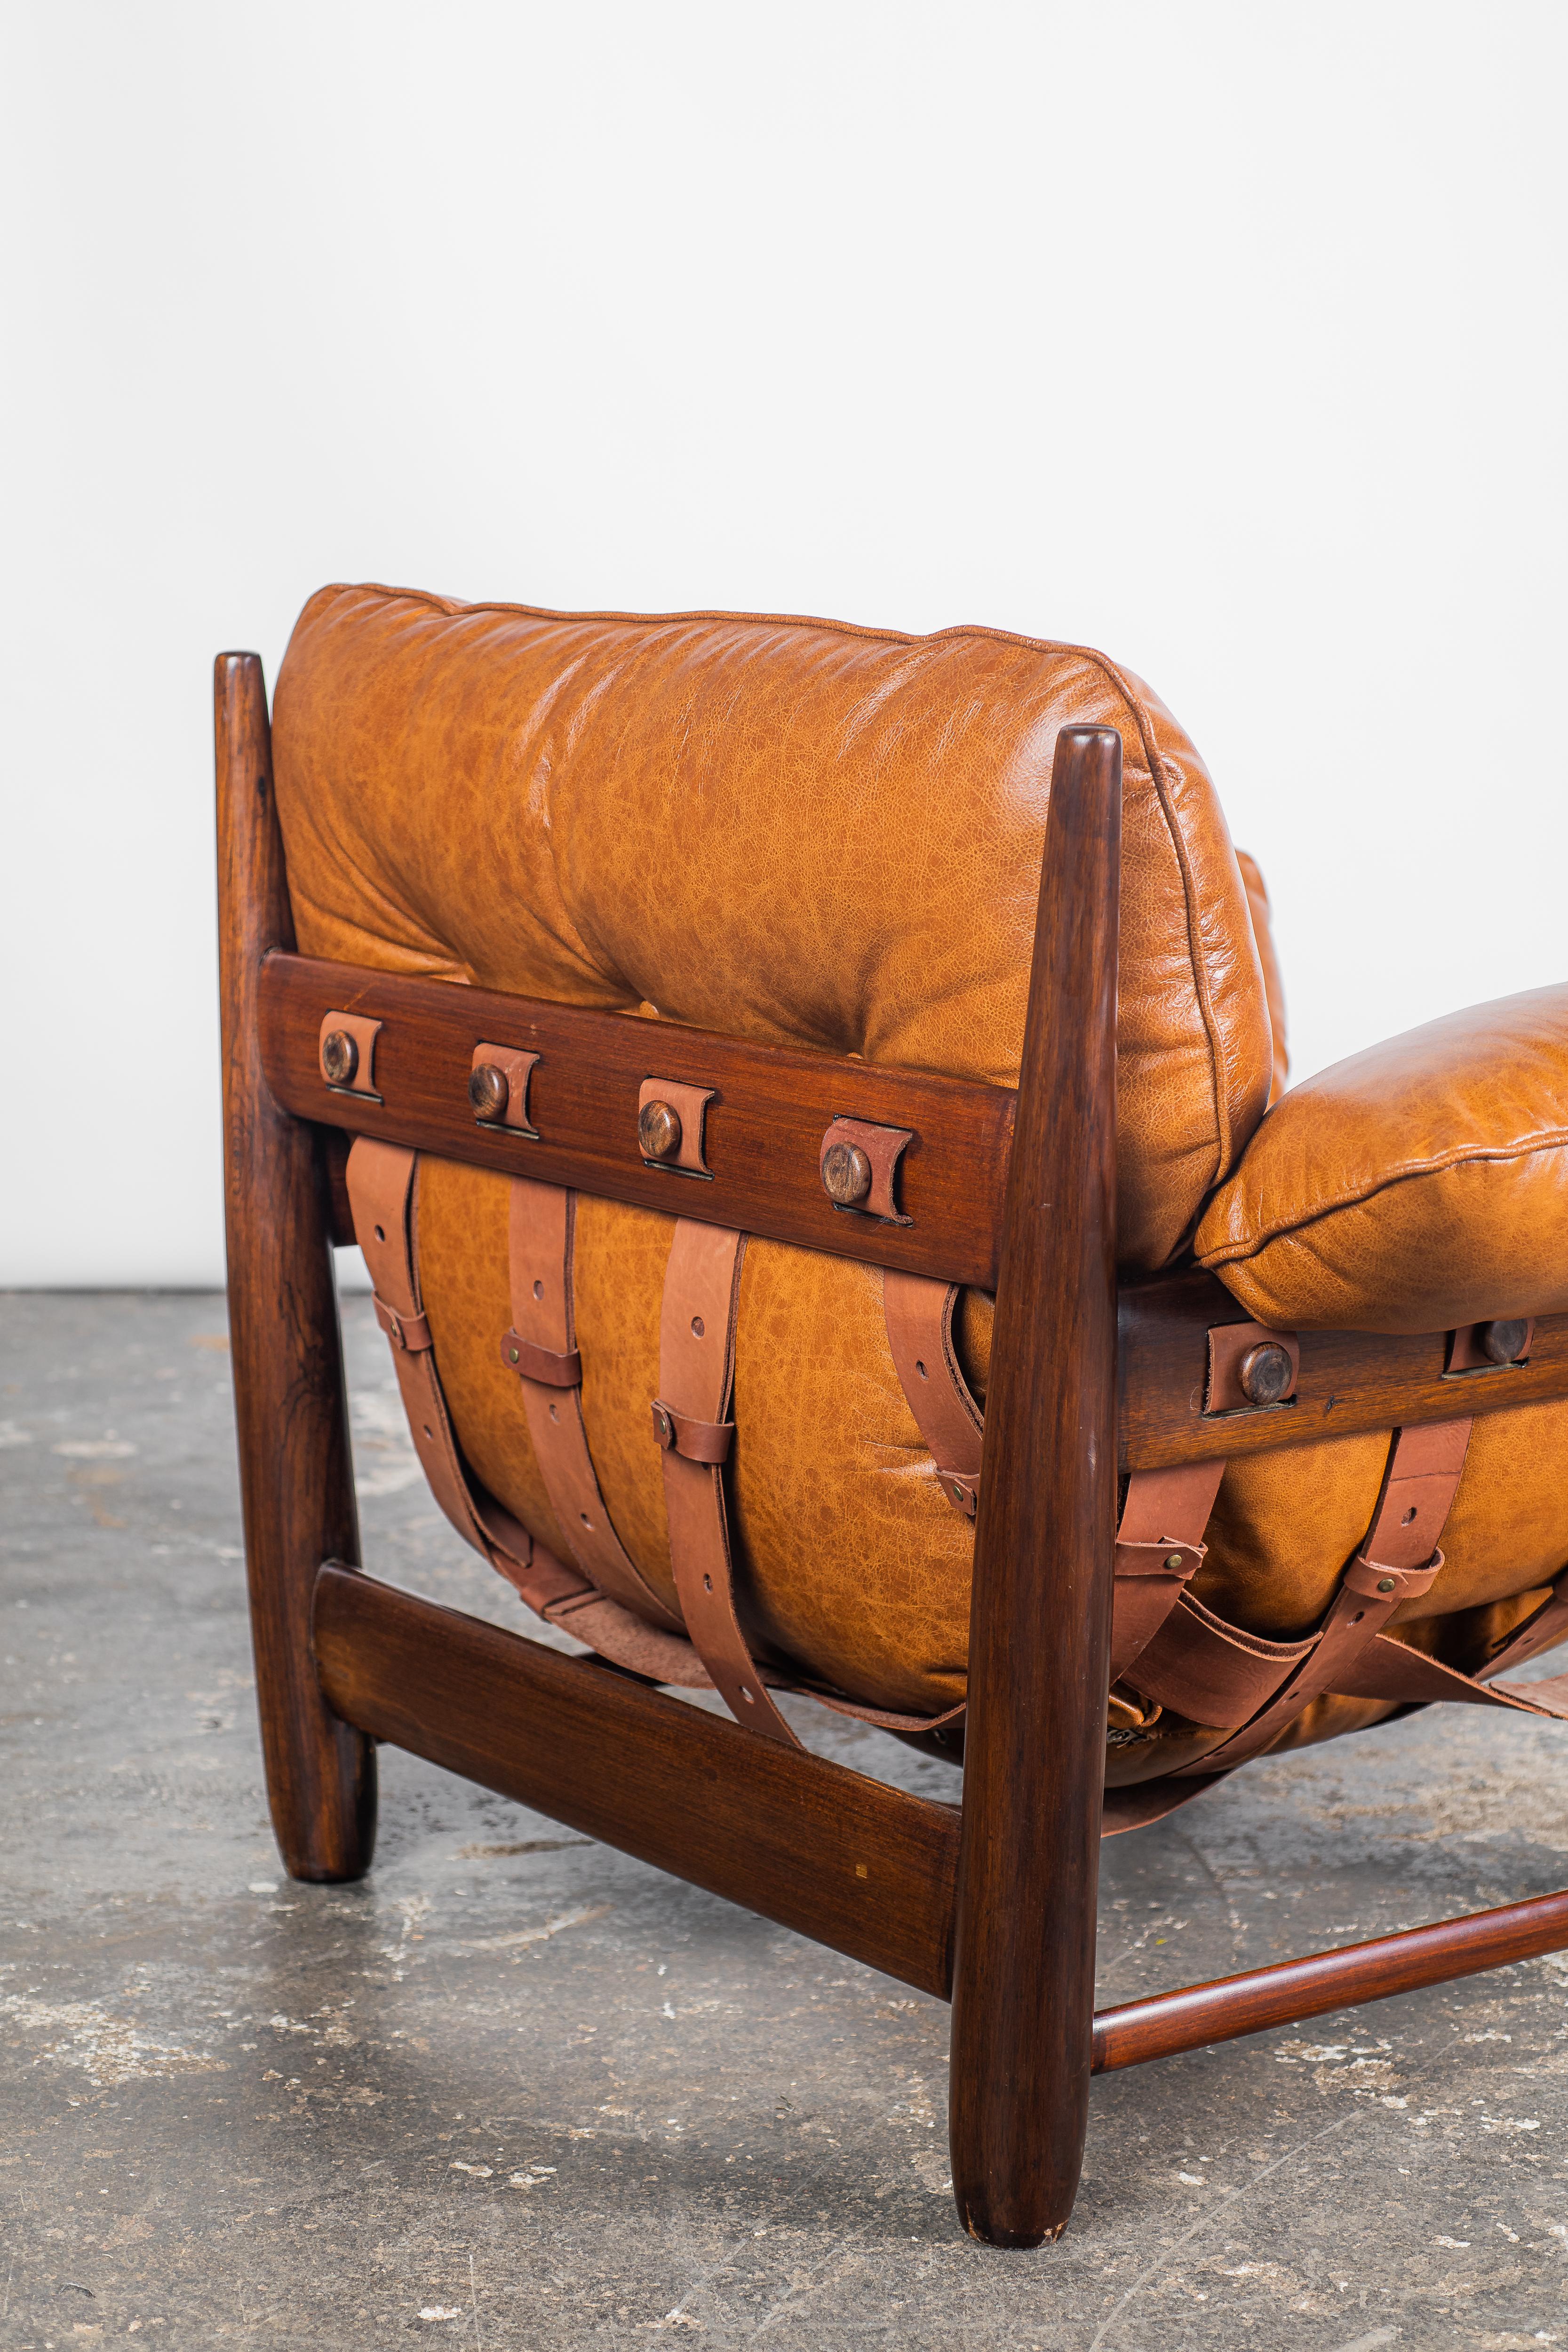 Hand-Carved Mole Armchair with Ottoman by Sergio Rodrigues, Mid-Century Modern-Vintage 1957